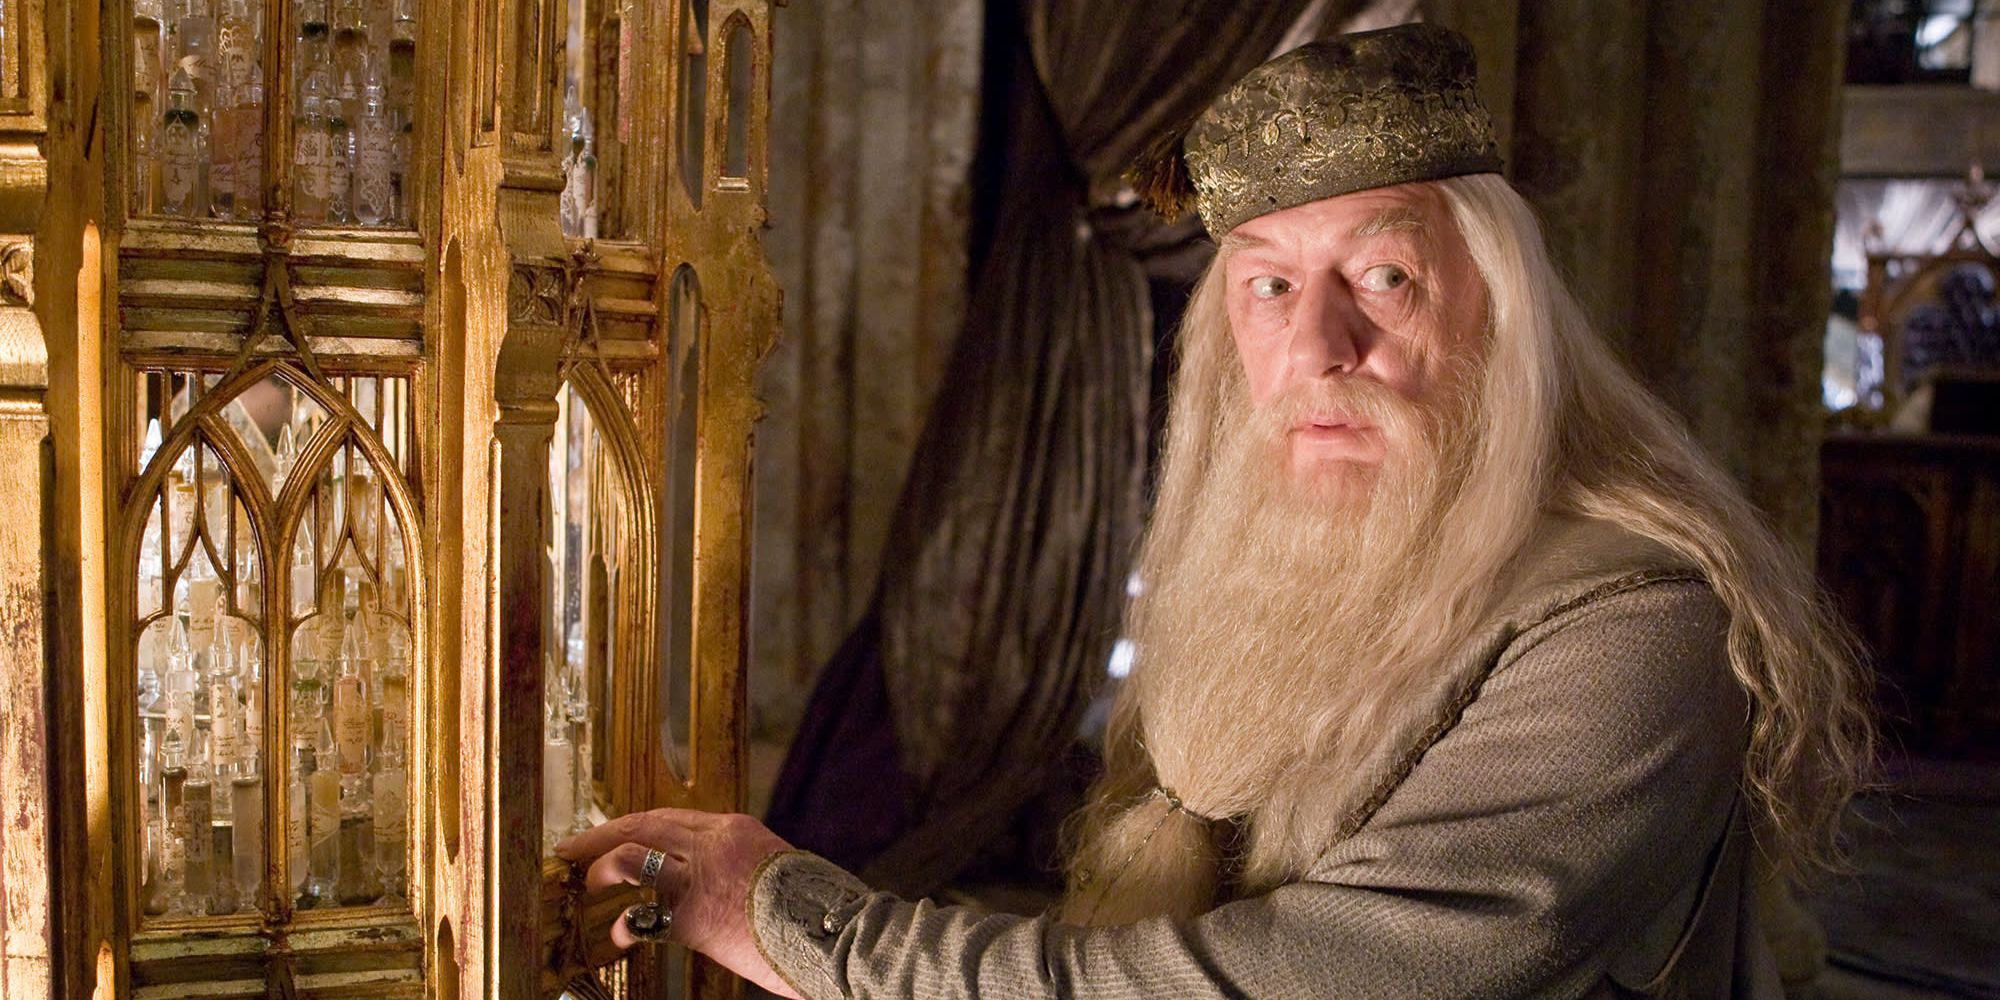 Albus Dumbledore  looking back at someone off-camera in Harry Potter